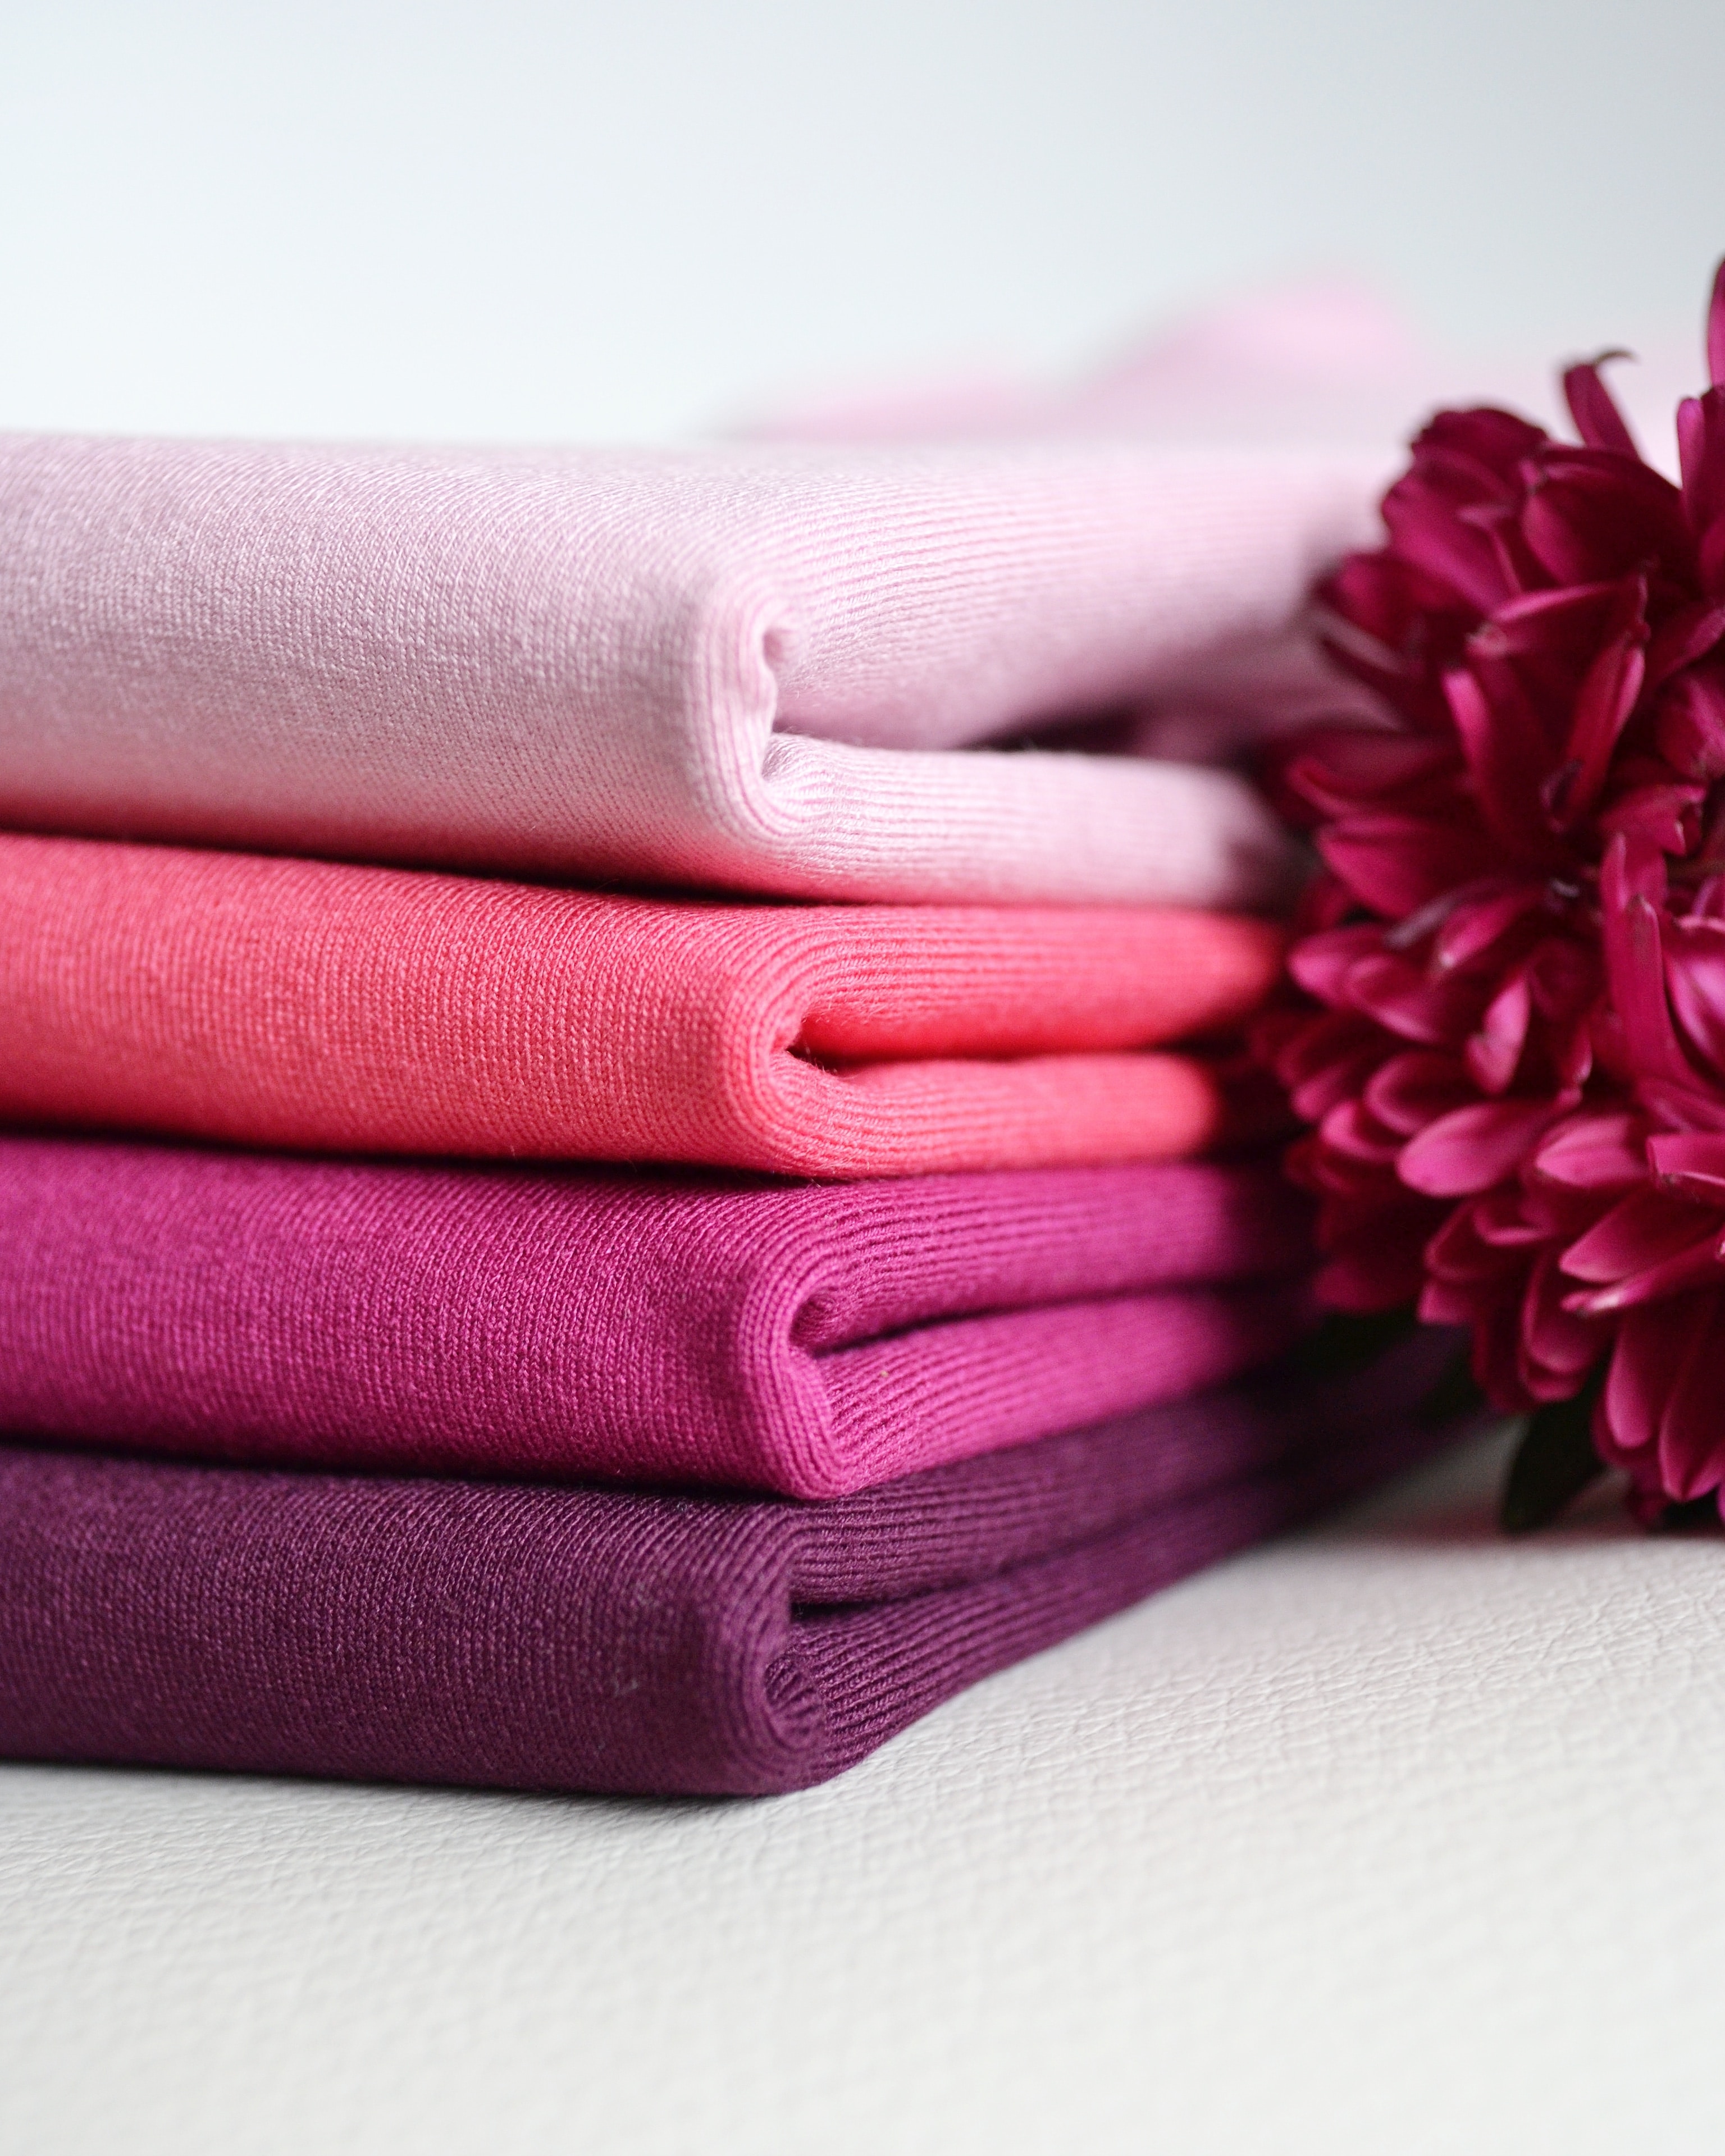 A stack of berry colored cashmere sweaters